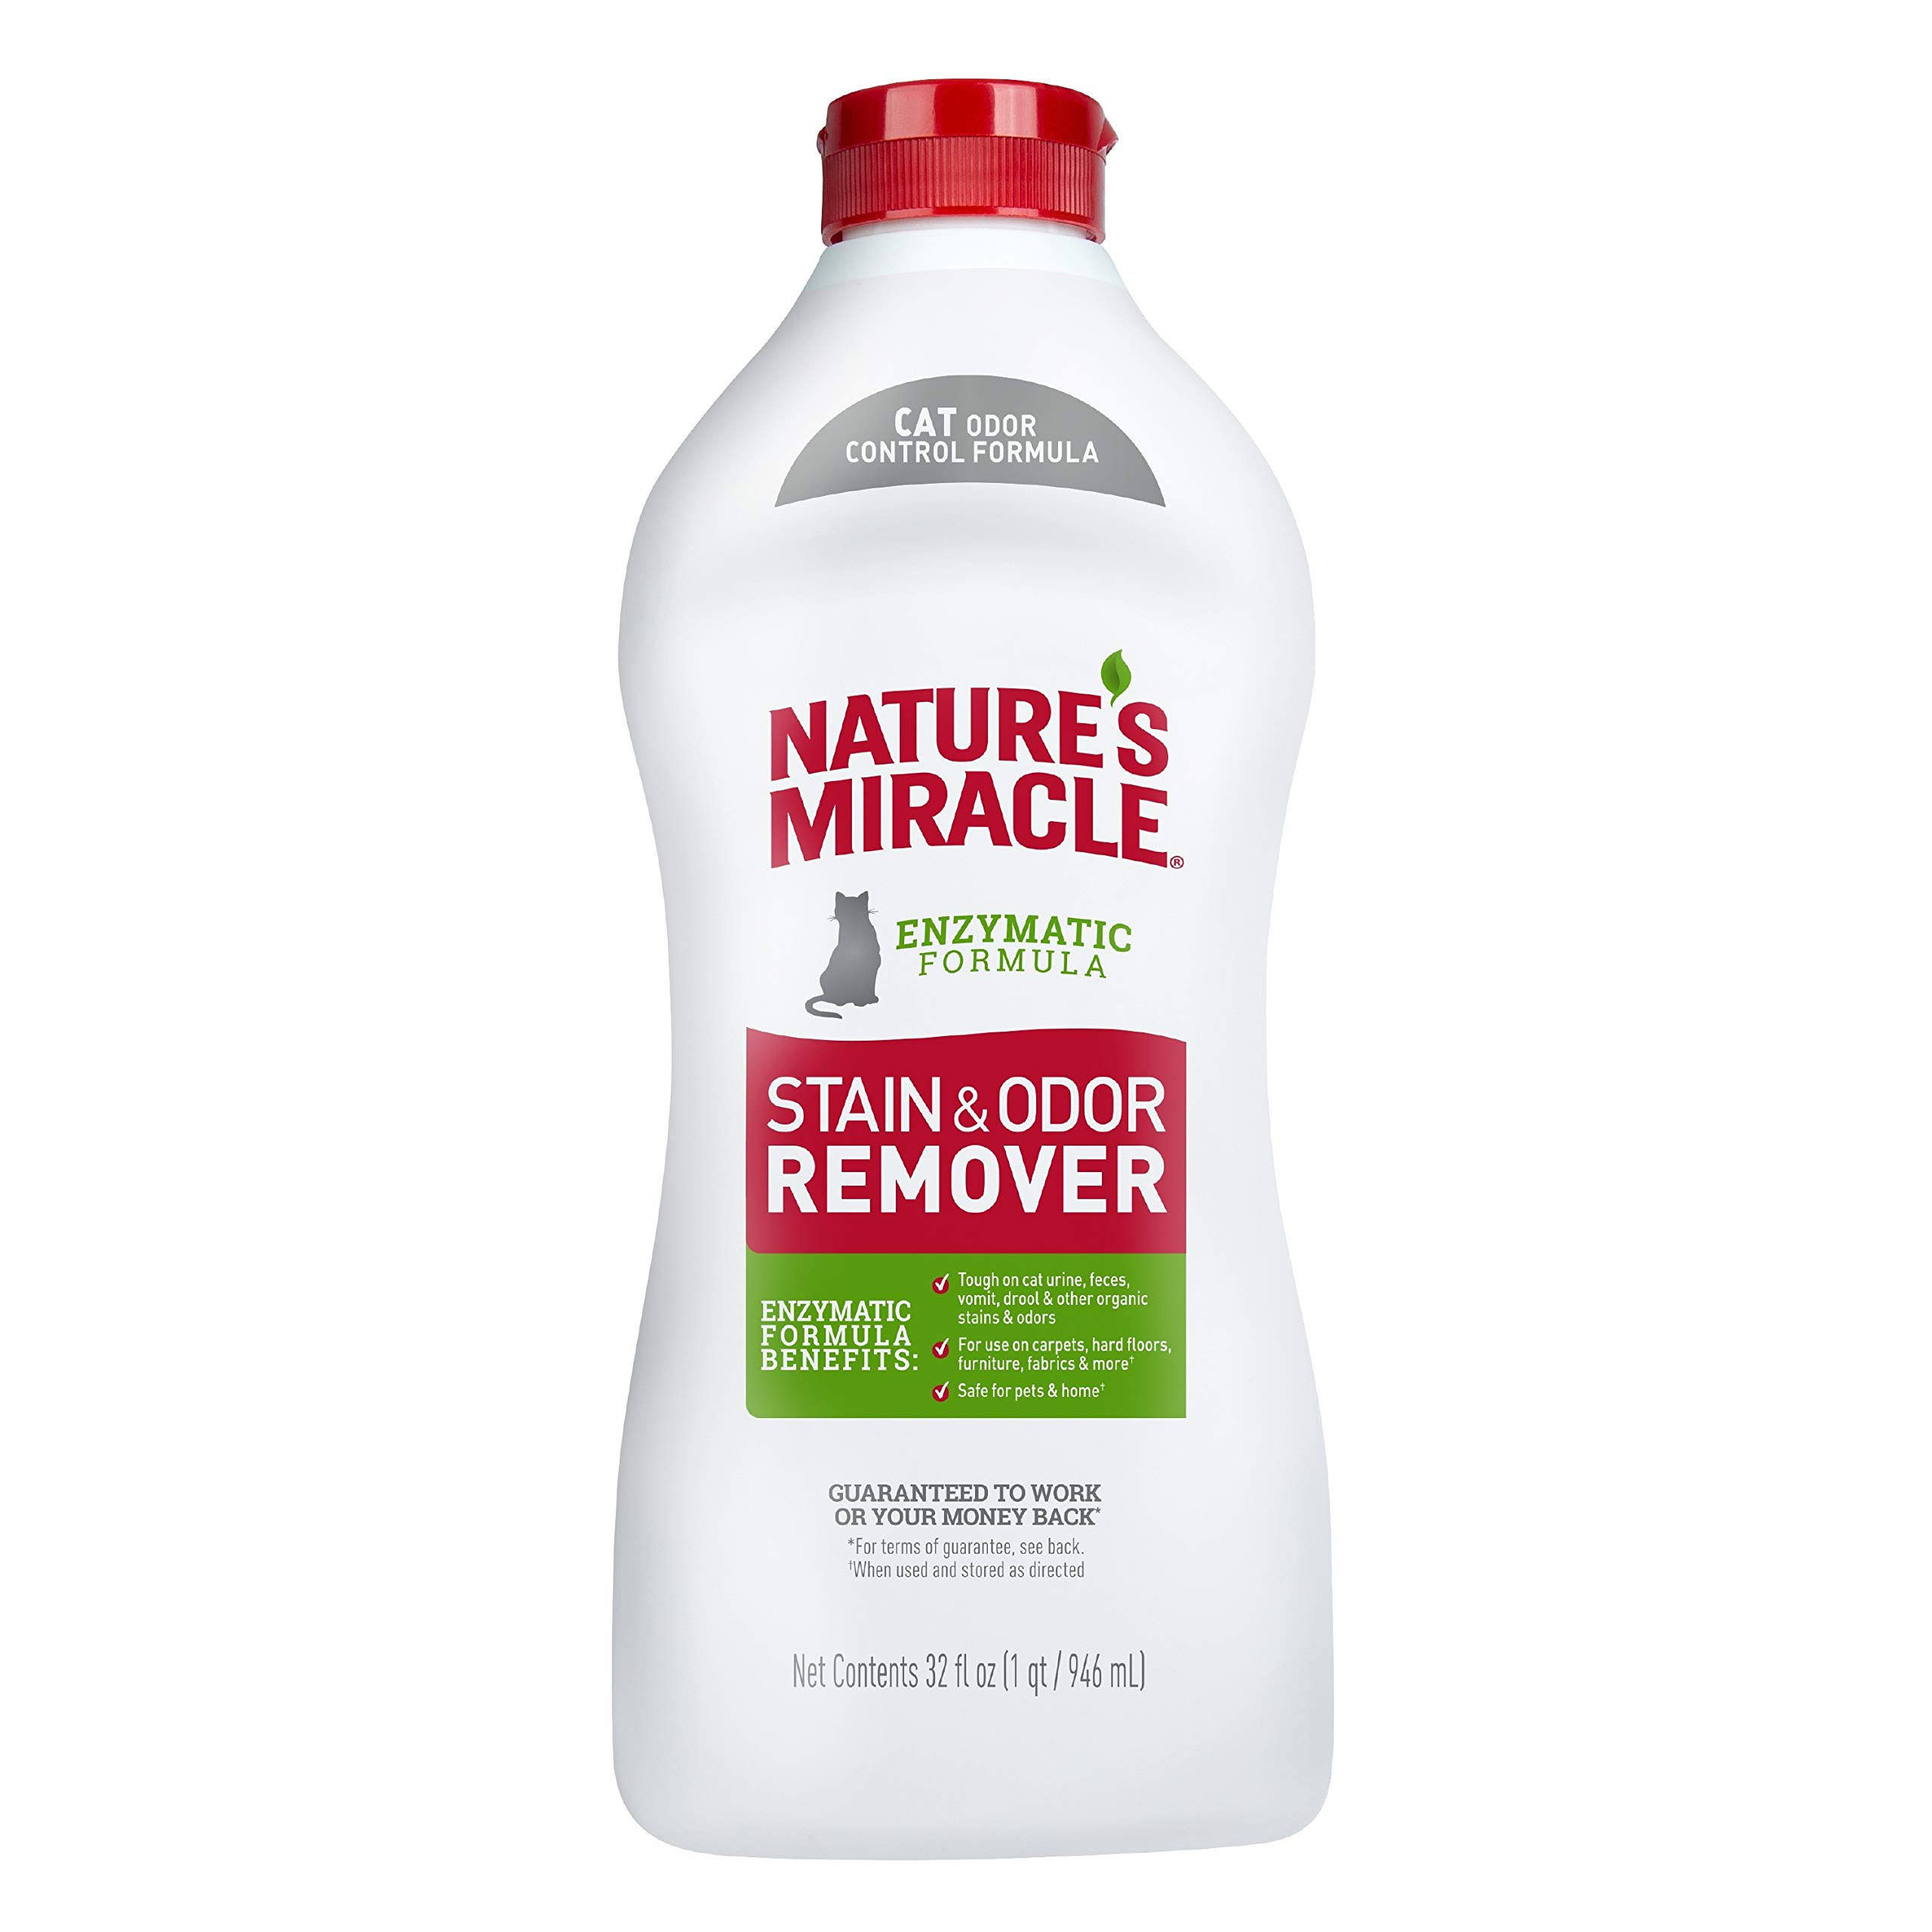 Nature's Miracle Just for Cats Stain & Odor Remover 32 oz